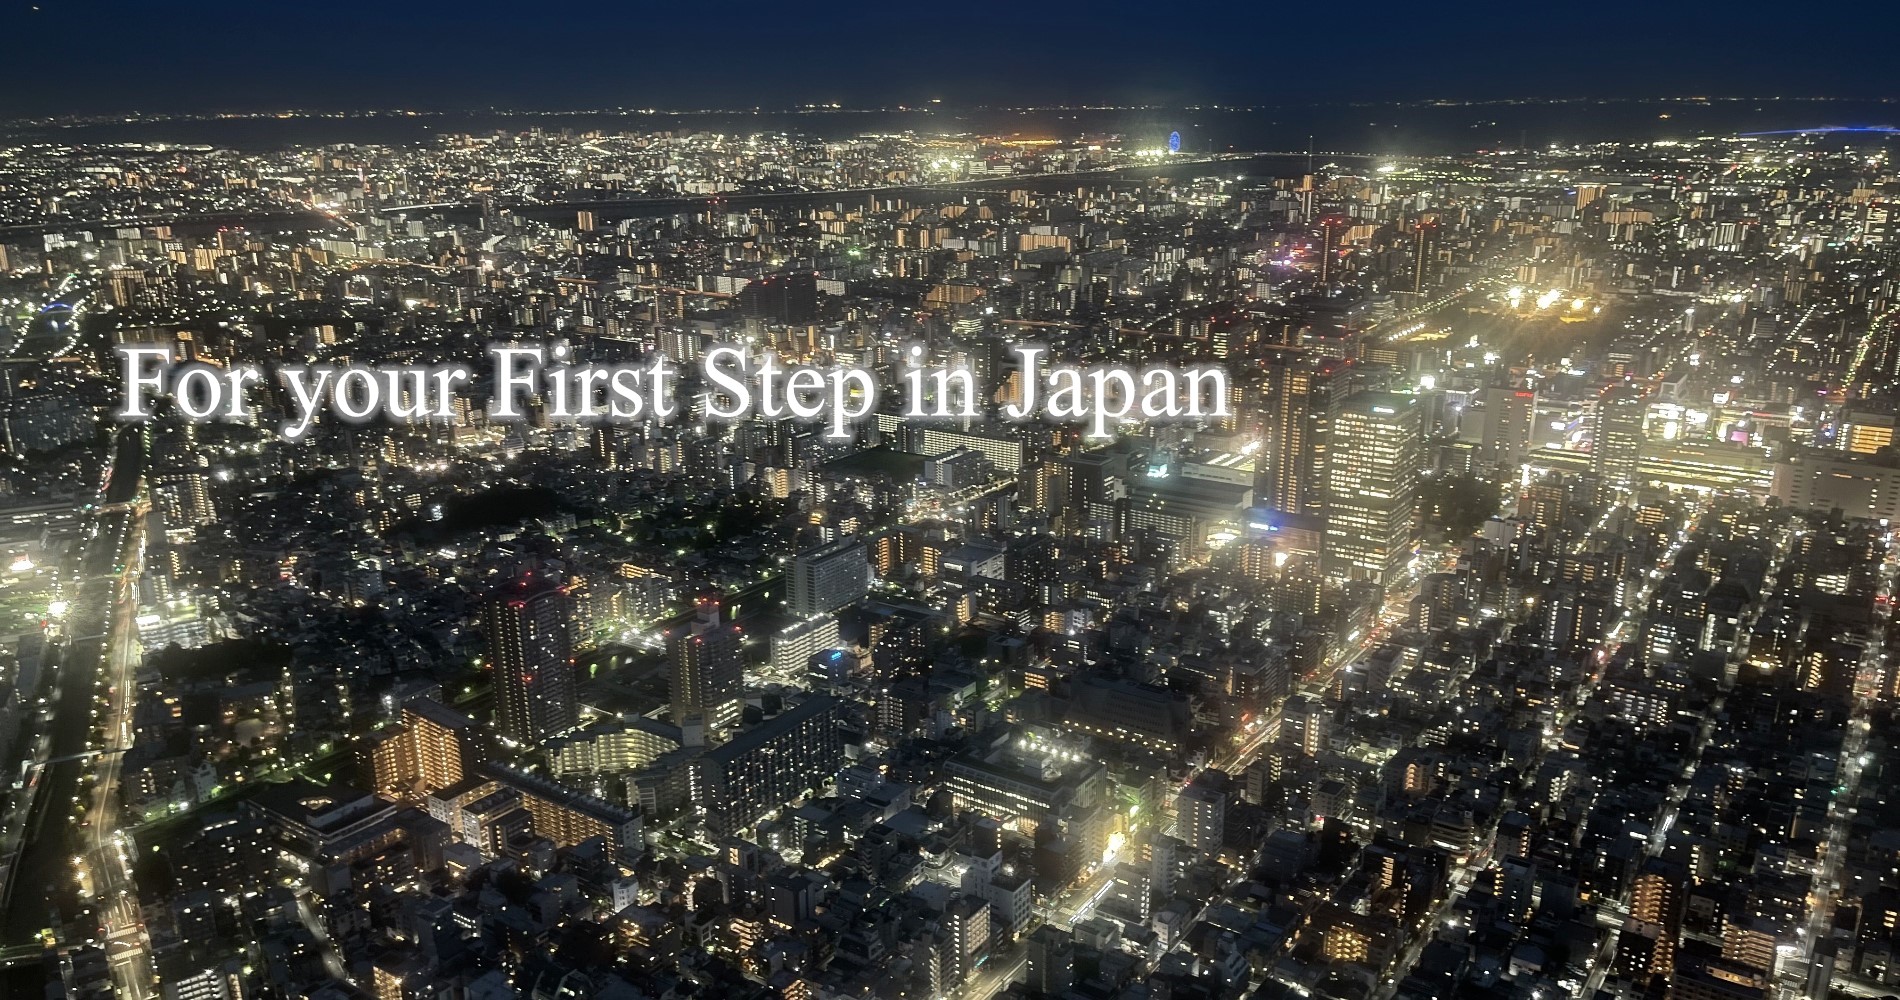 For your First Step in Japan (Tokyo sky tree Night view)